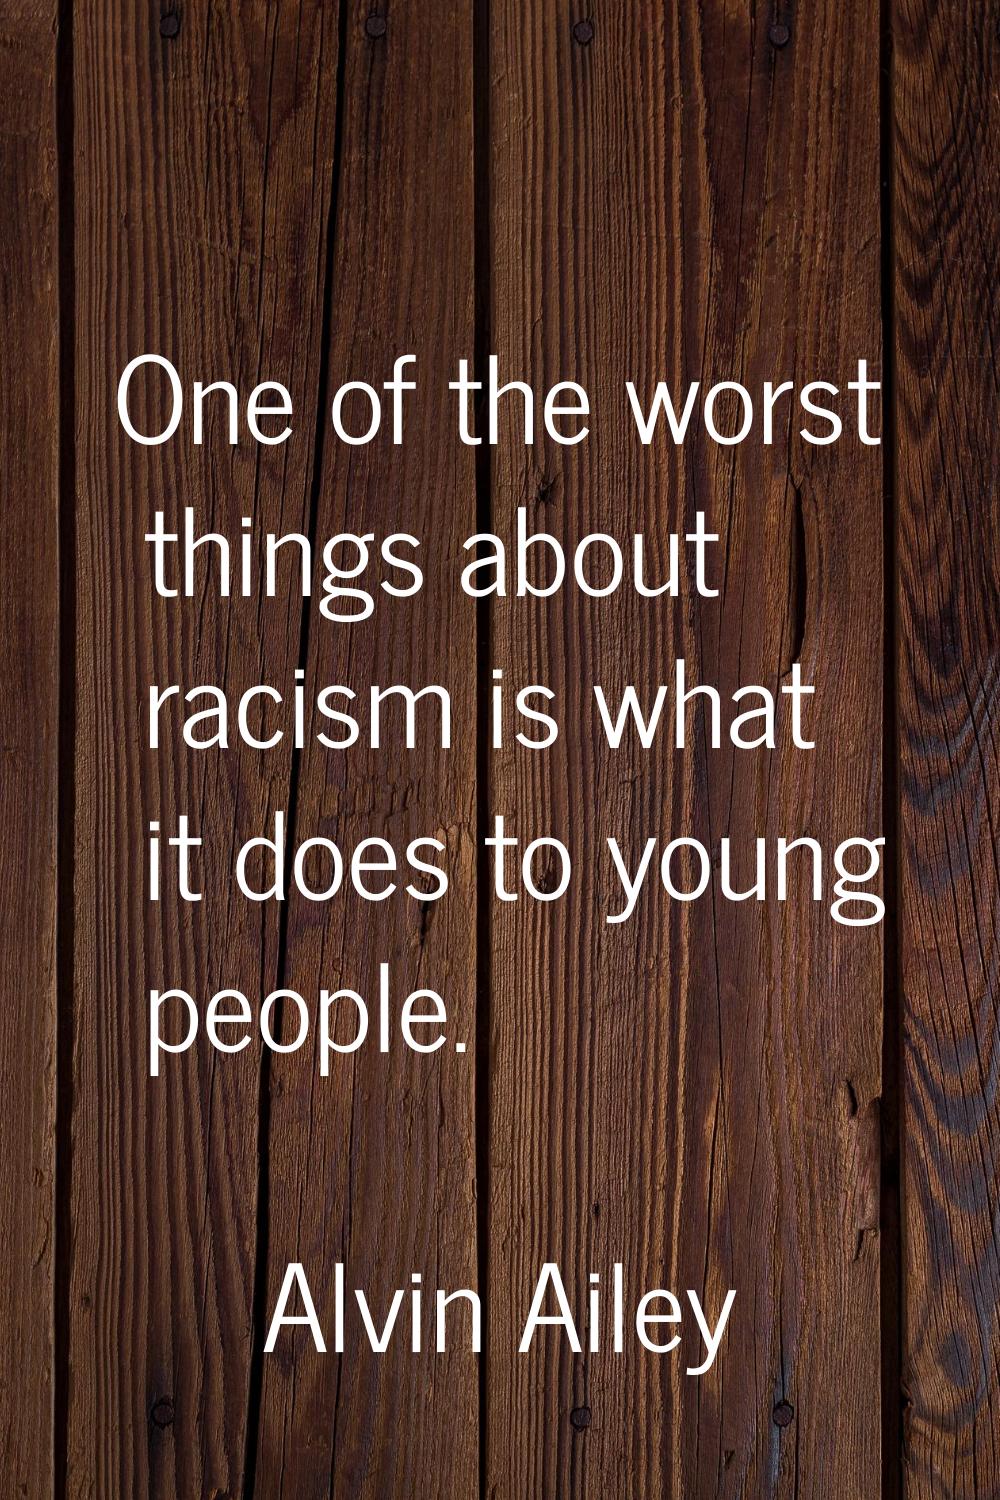 One of the worst things about racism is what it does to young people.